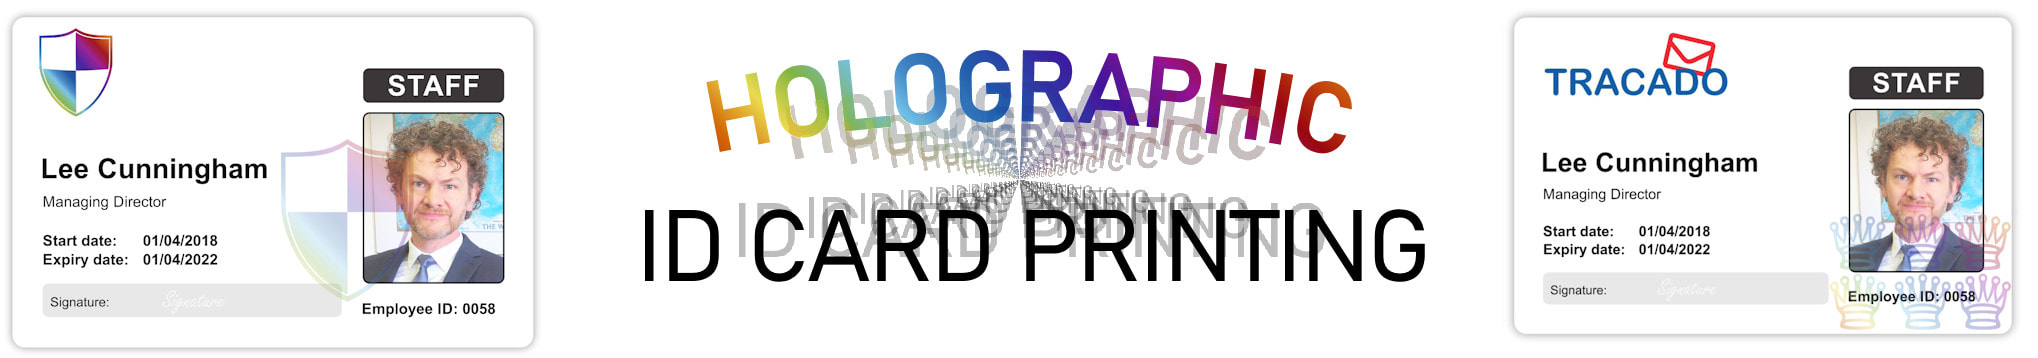 Coventry holographic ID card print service. Employee Identity cards with hologram or holograph security mark. CV1 CV2 CV3 CV4 CV5 CV6 CV7 CV8  CV9 CV10 CV11 CV12 CV13 CV21 CV22 CV23 CV31 CV32 CV33 CV34 CV35 CV36 CV37 CV47